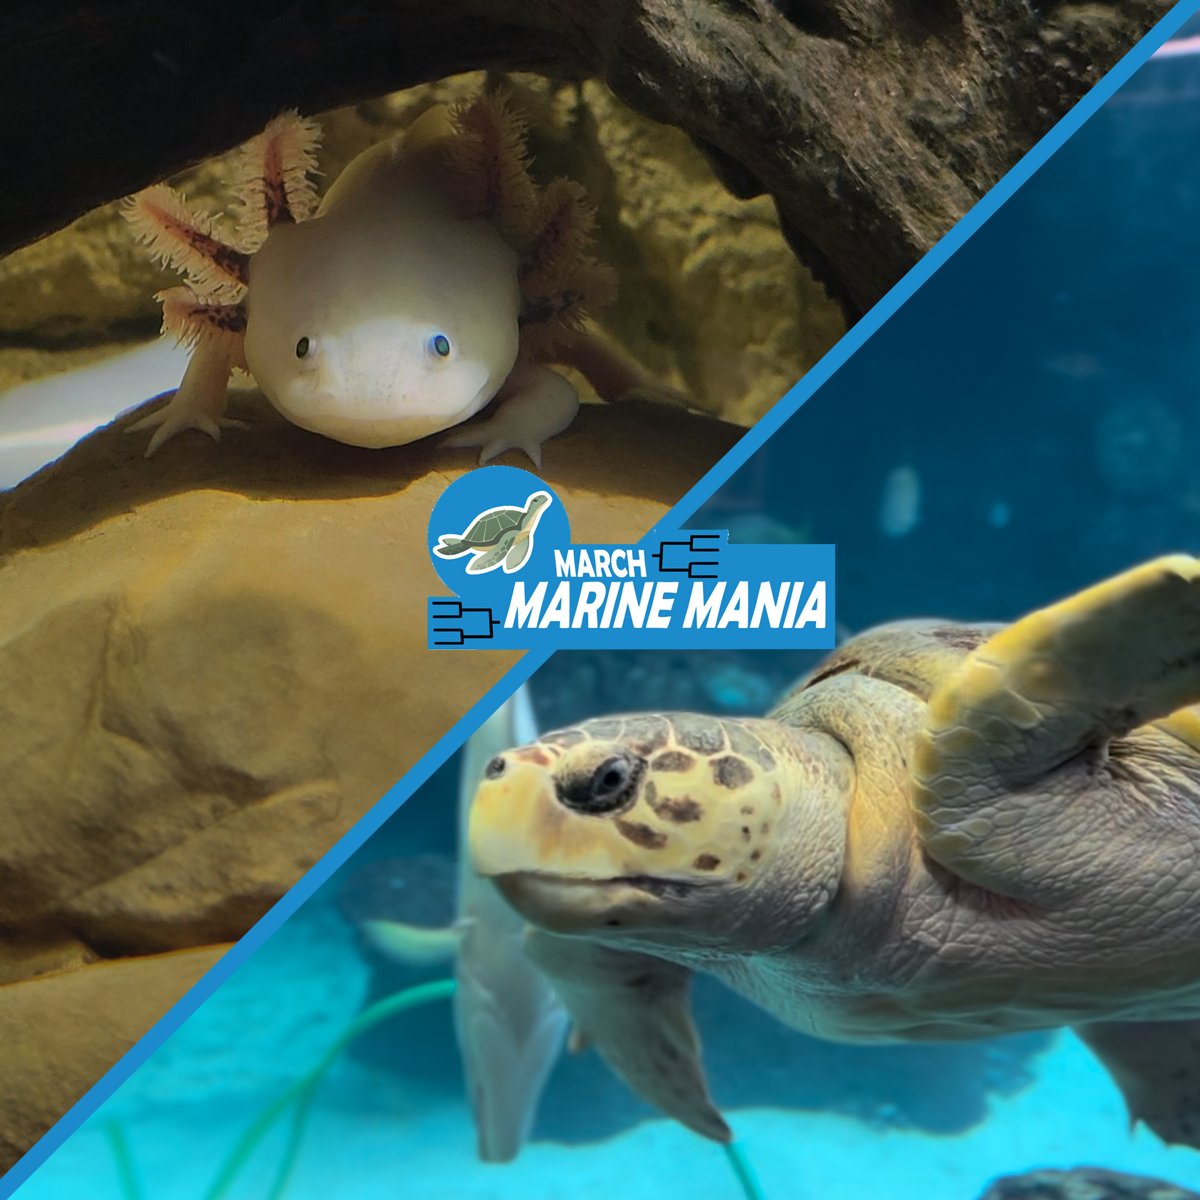 Cast your vote for in the FIN-al Four! Reply which animal you're sending to the championship ⬇️ #MarchMarineMania River otters or cownose rays against axolotls or the loggerhead sea turtle?